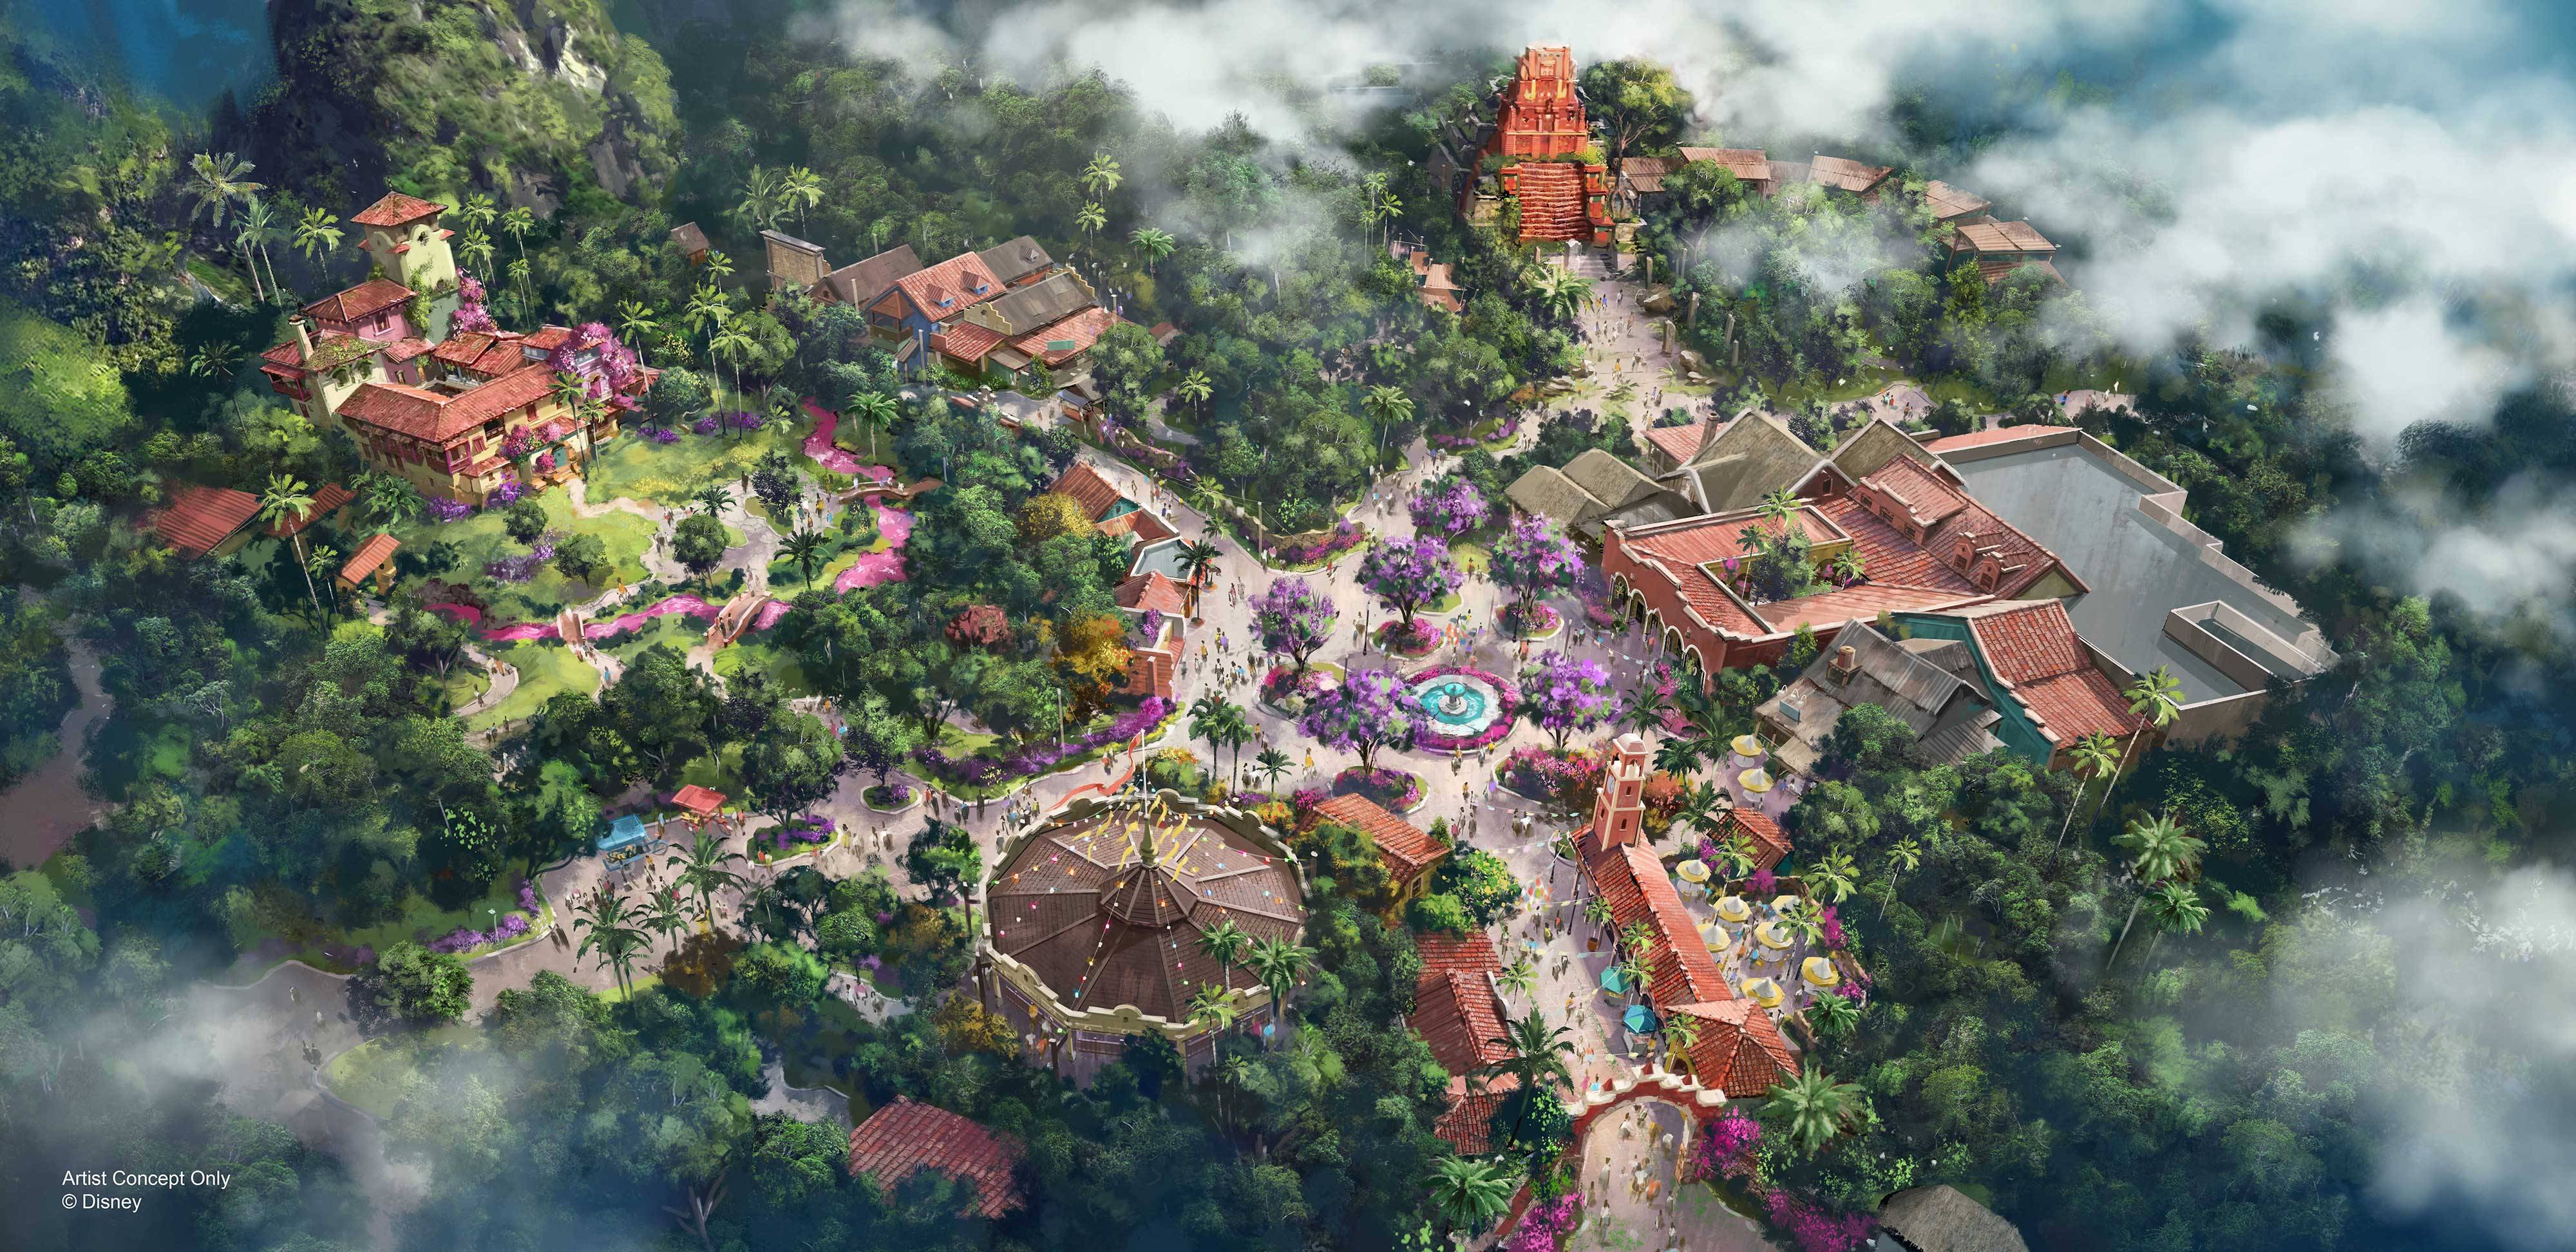 New permit suggests major expansion at Disney's Animal Kingdom is a go